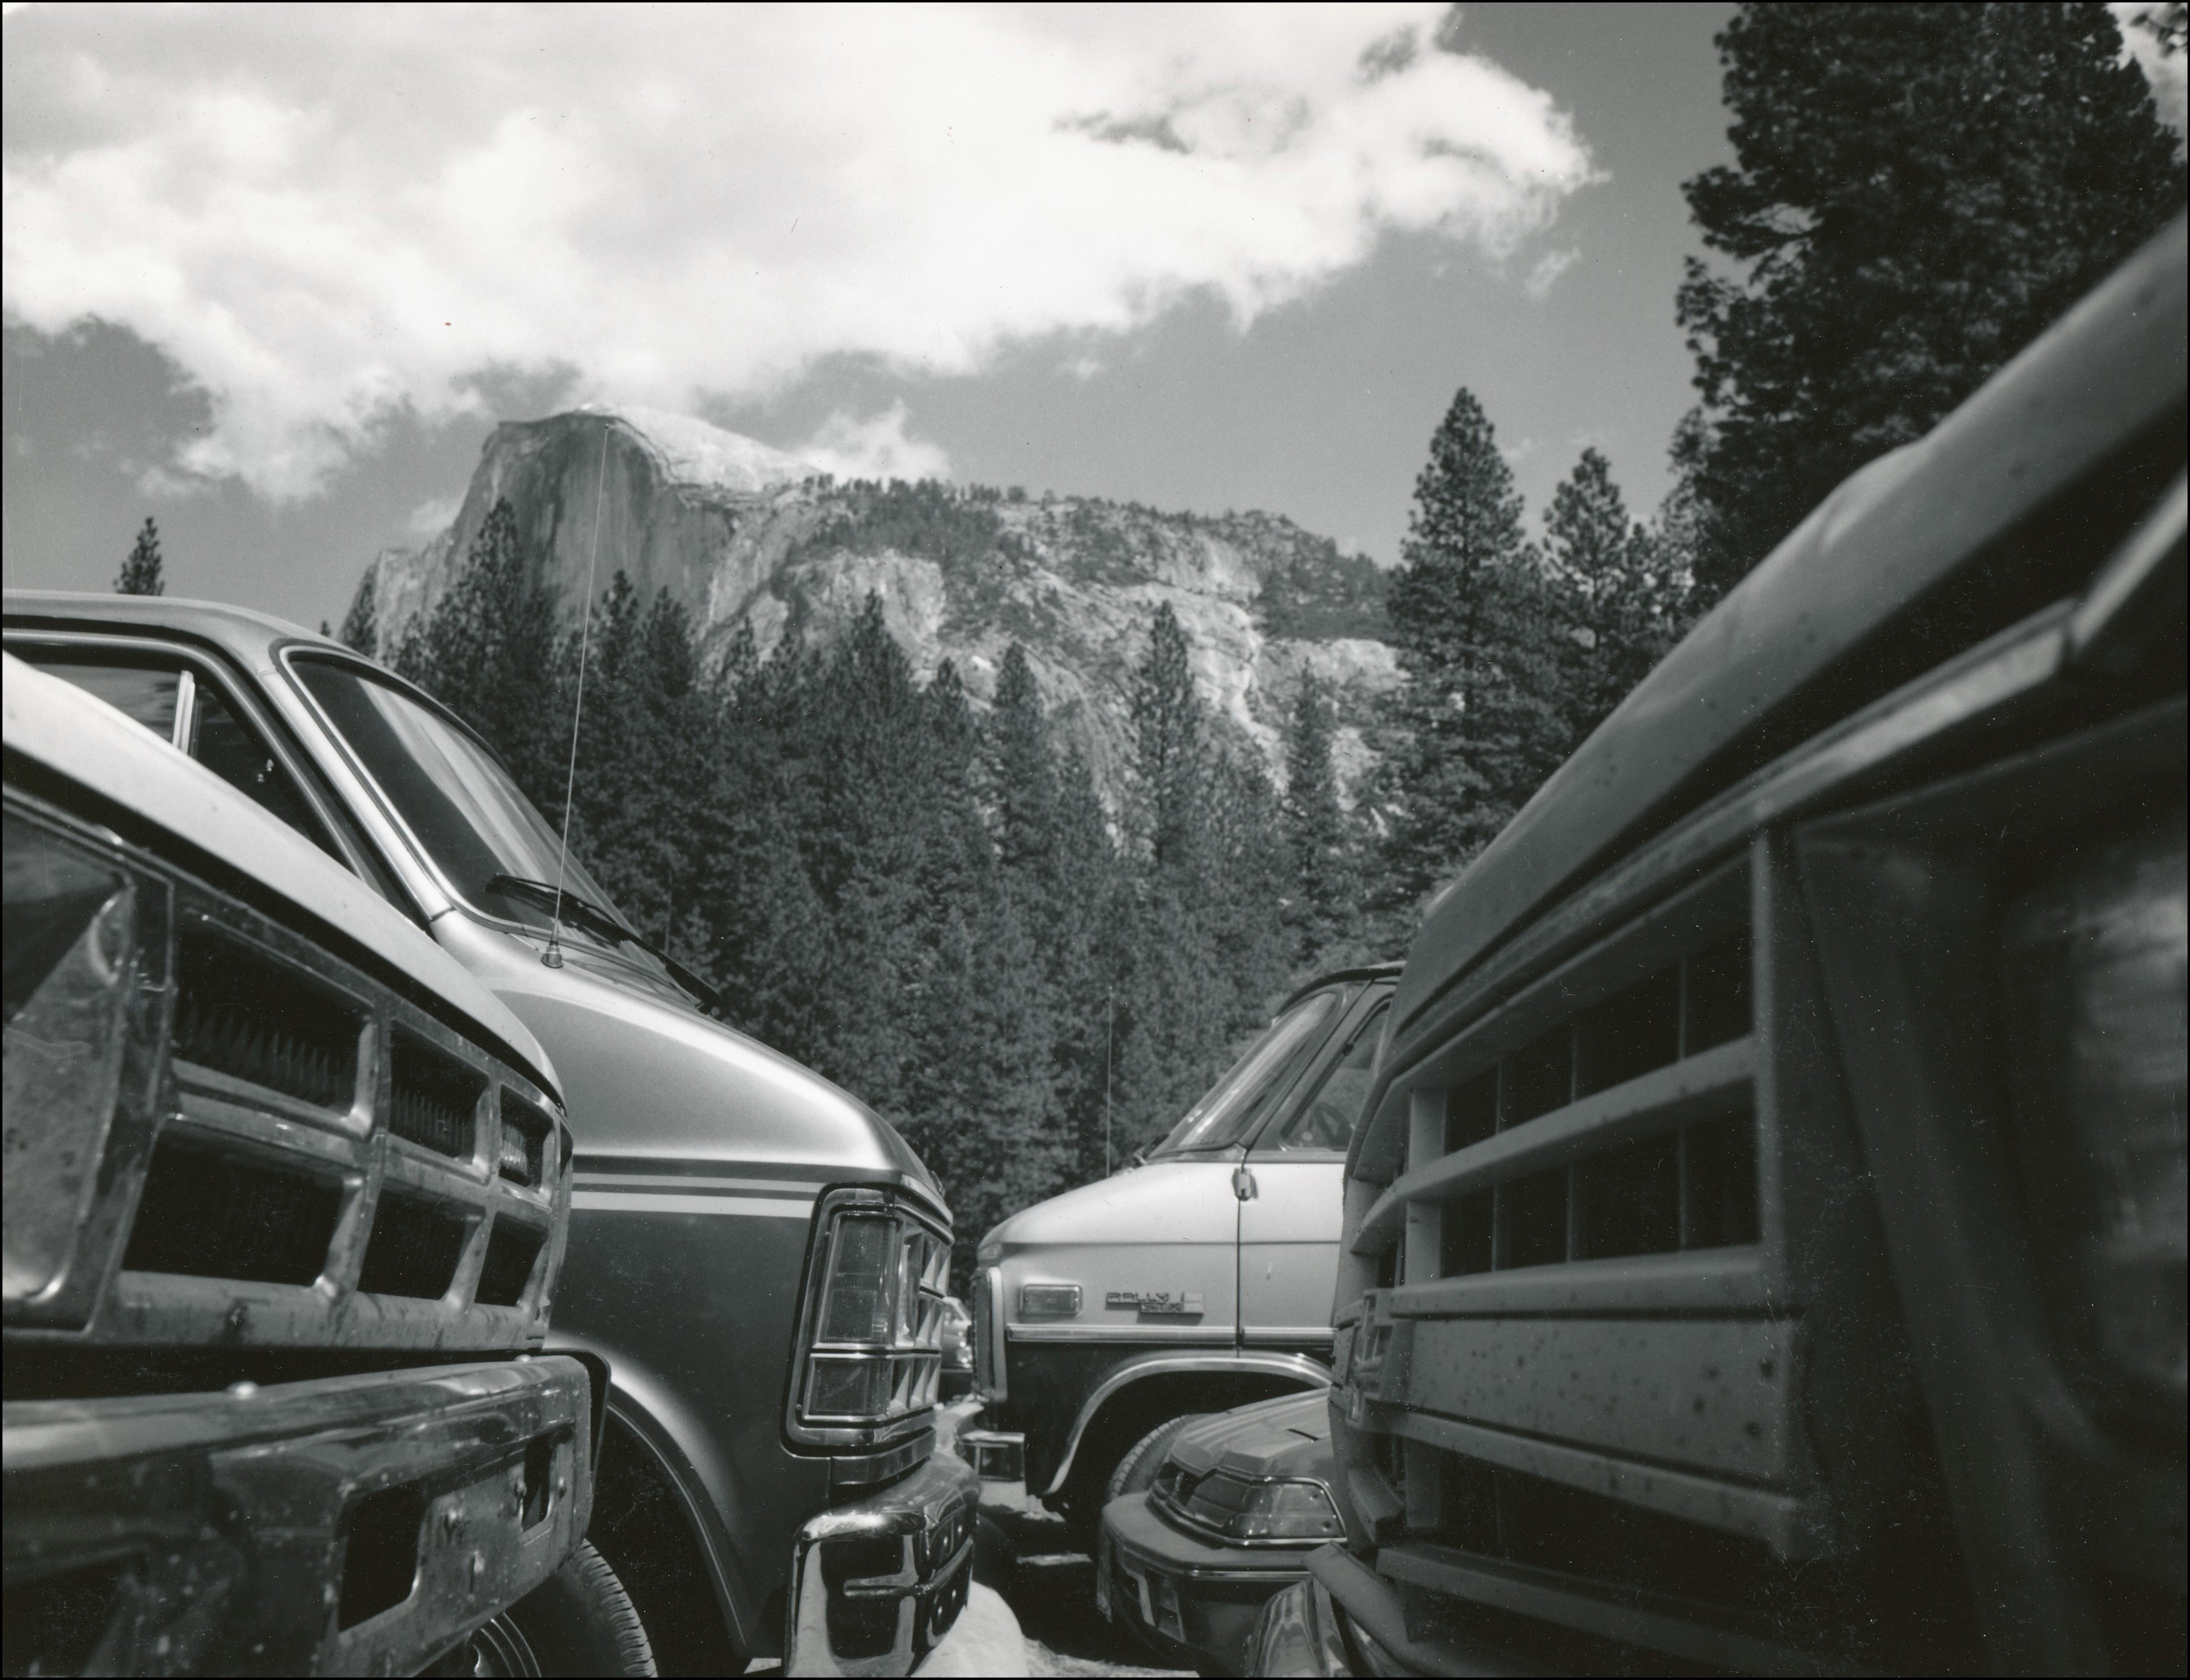 Parking lot full of cars with view of half dome in background